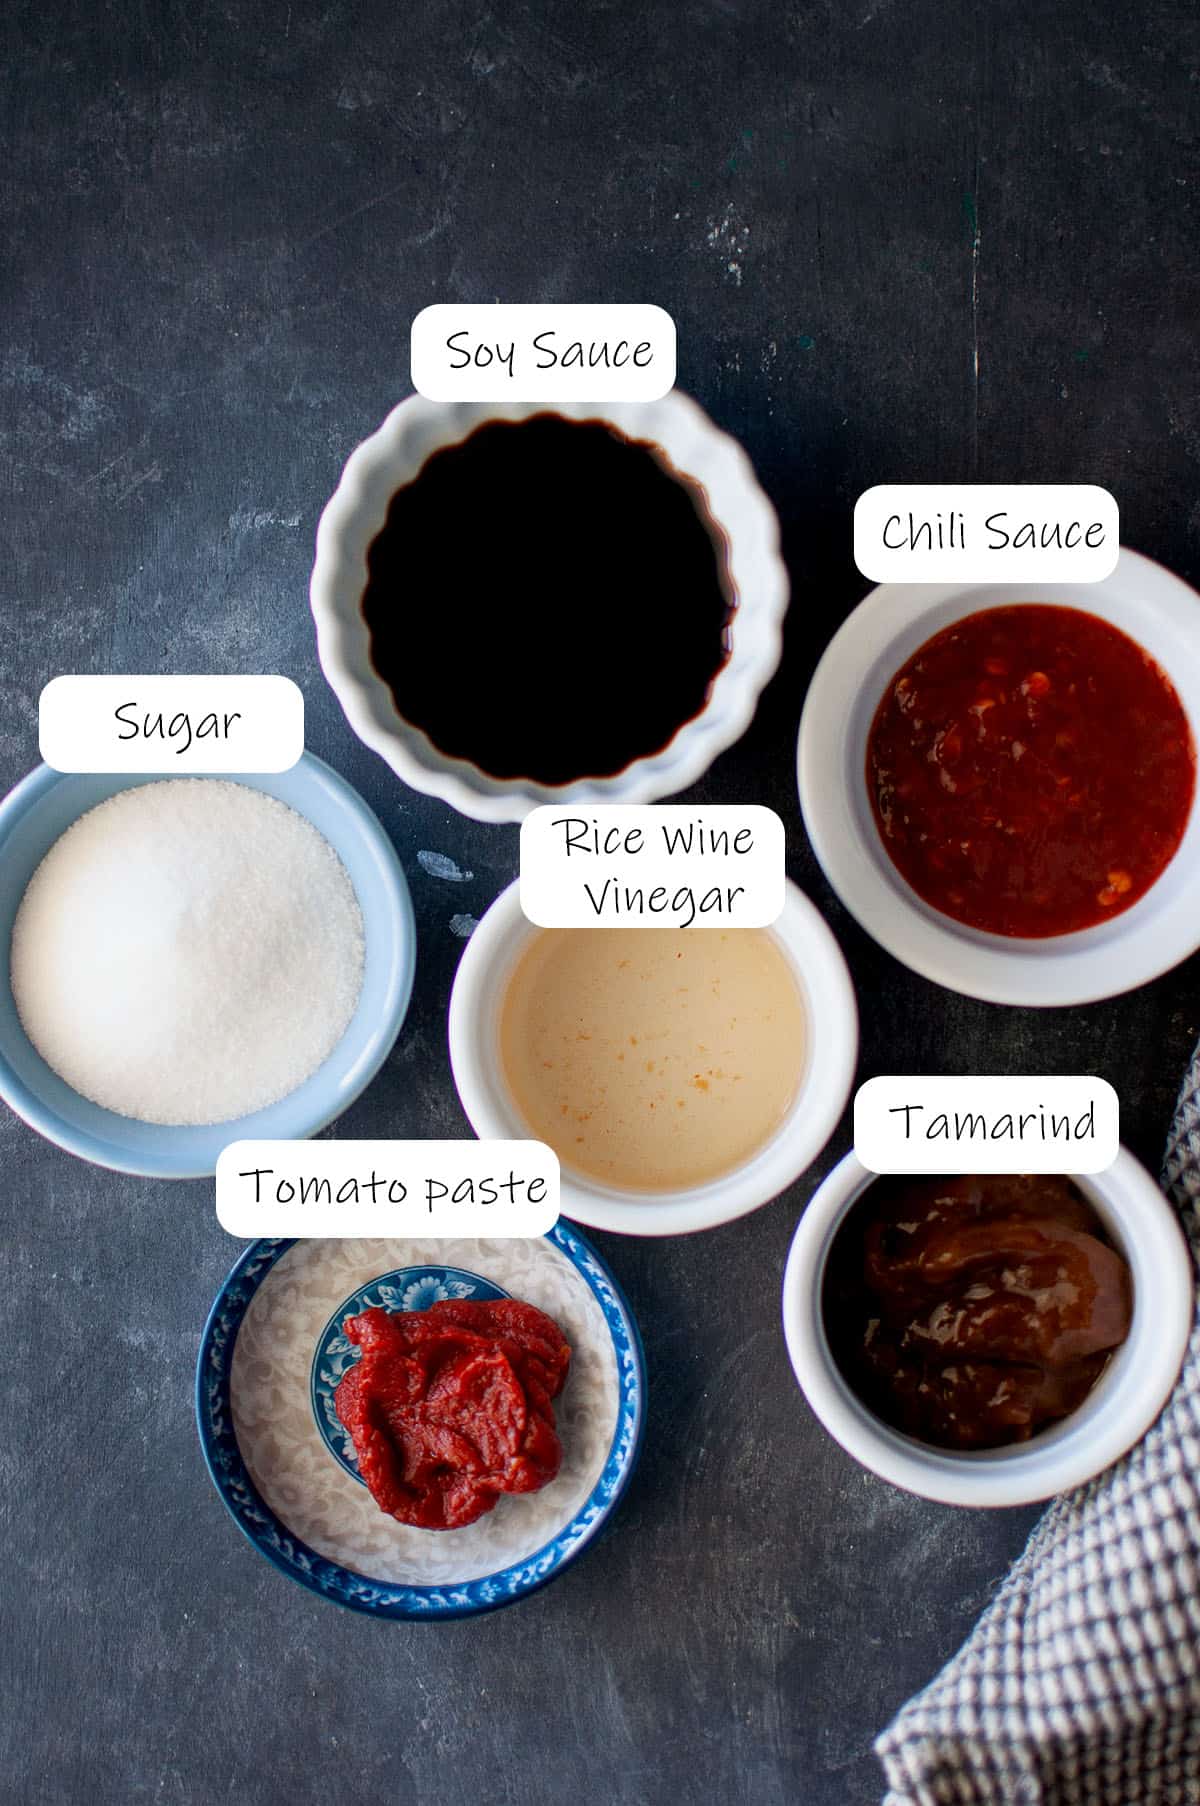 Ingredients to make the sauce, details in recipe card.